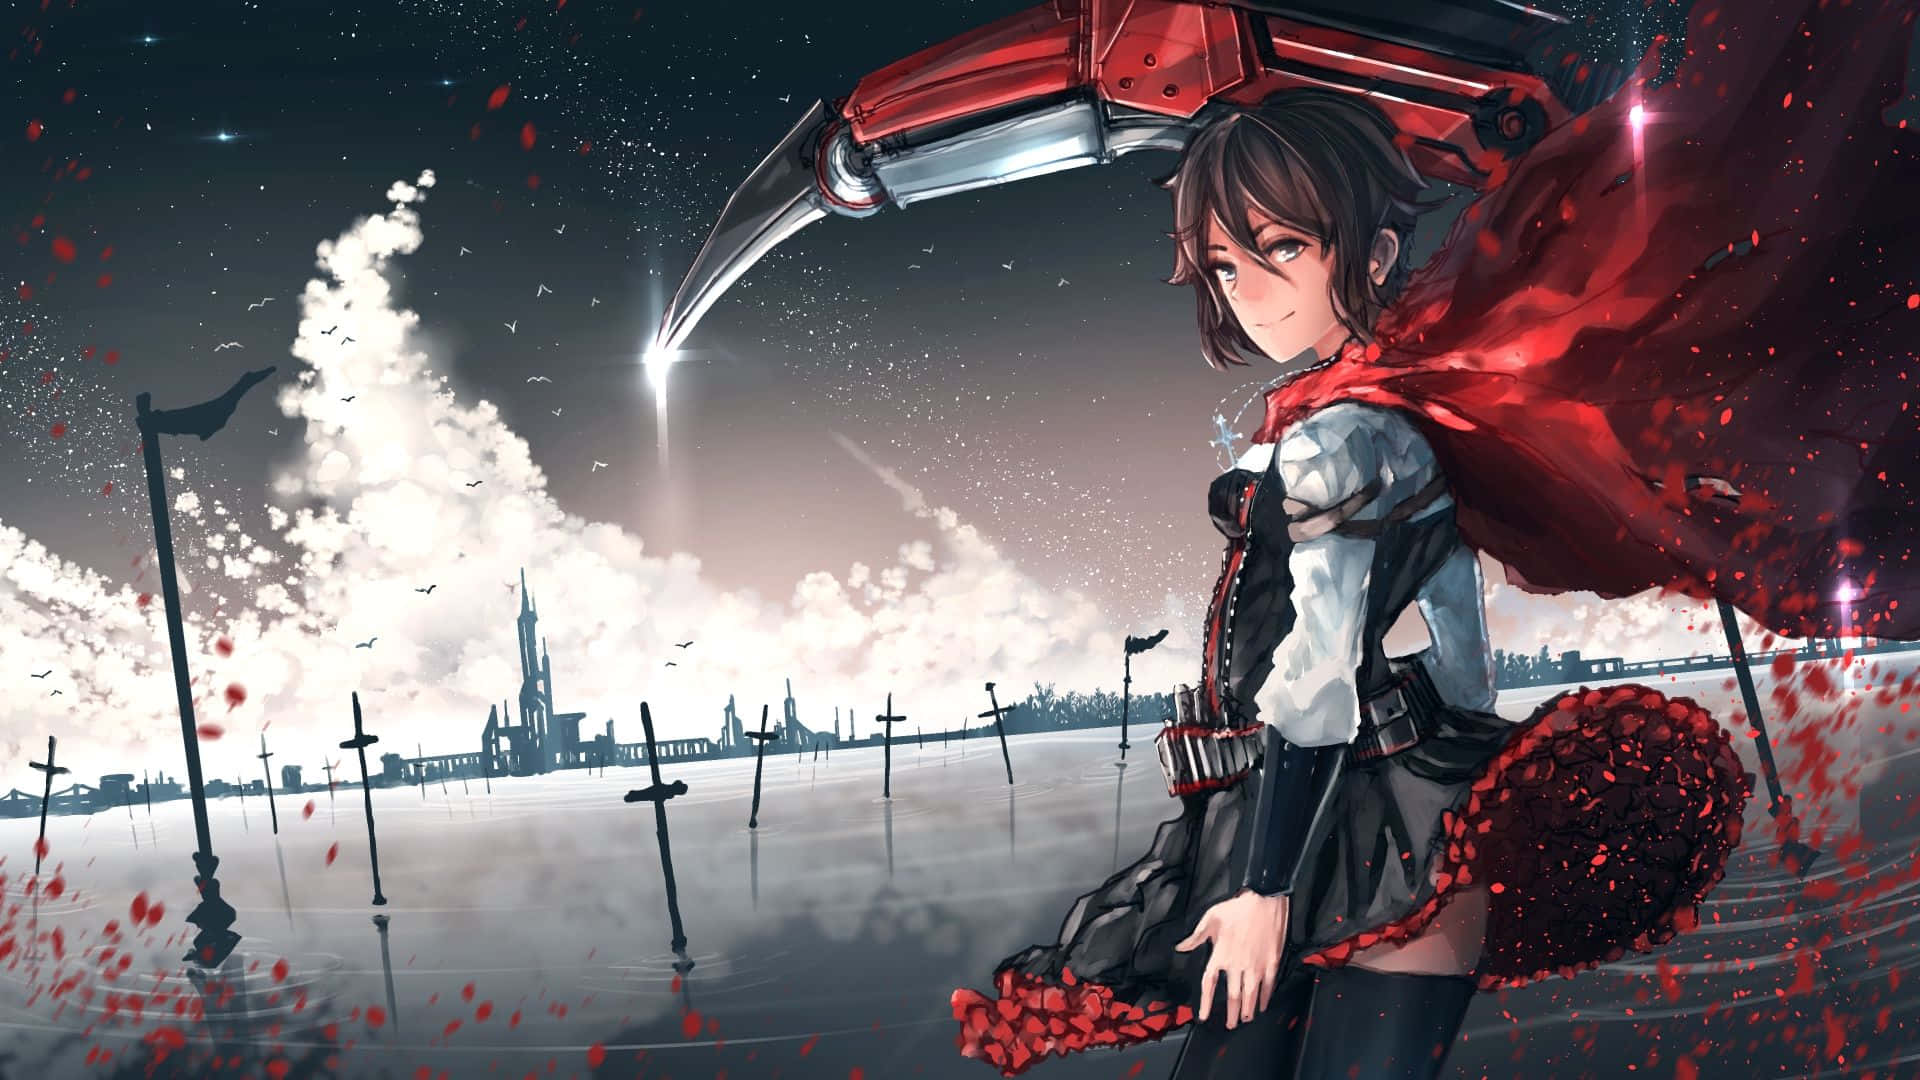 Join Team RWBY and explore the magical world of Remnant!